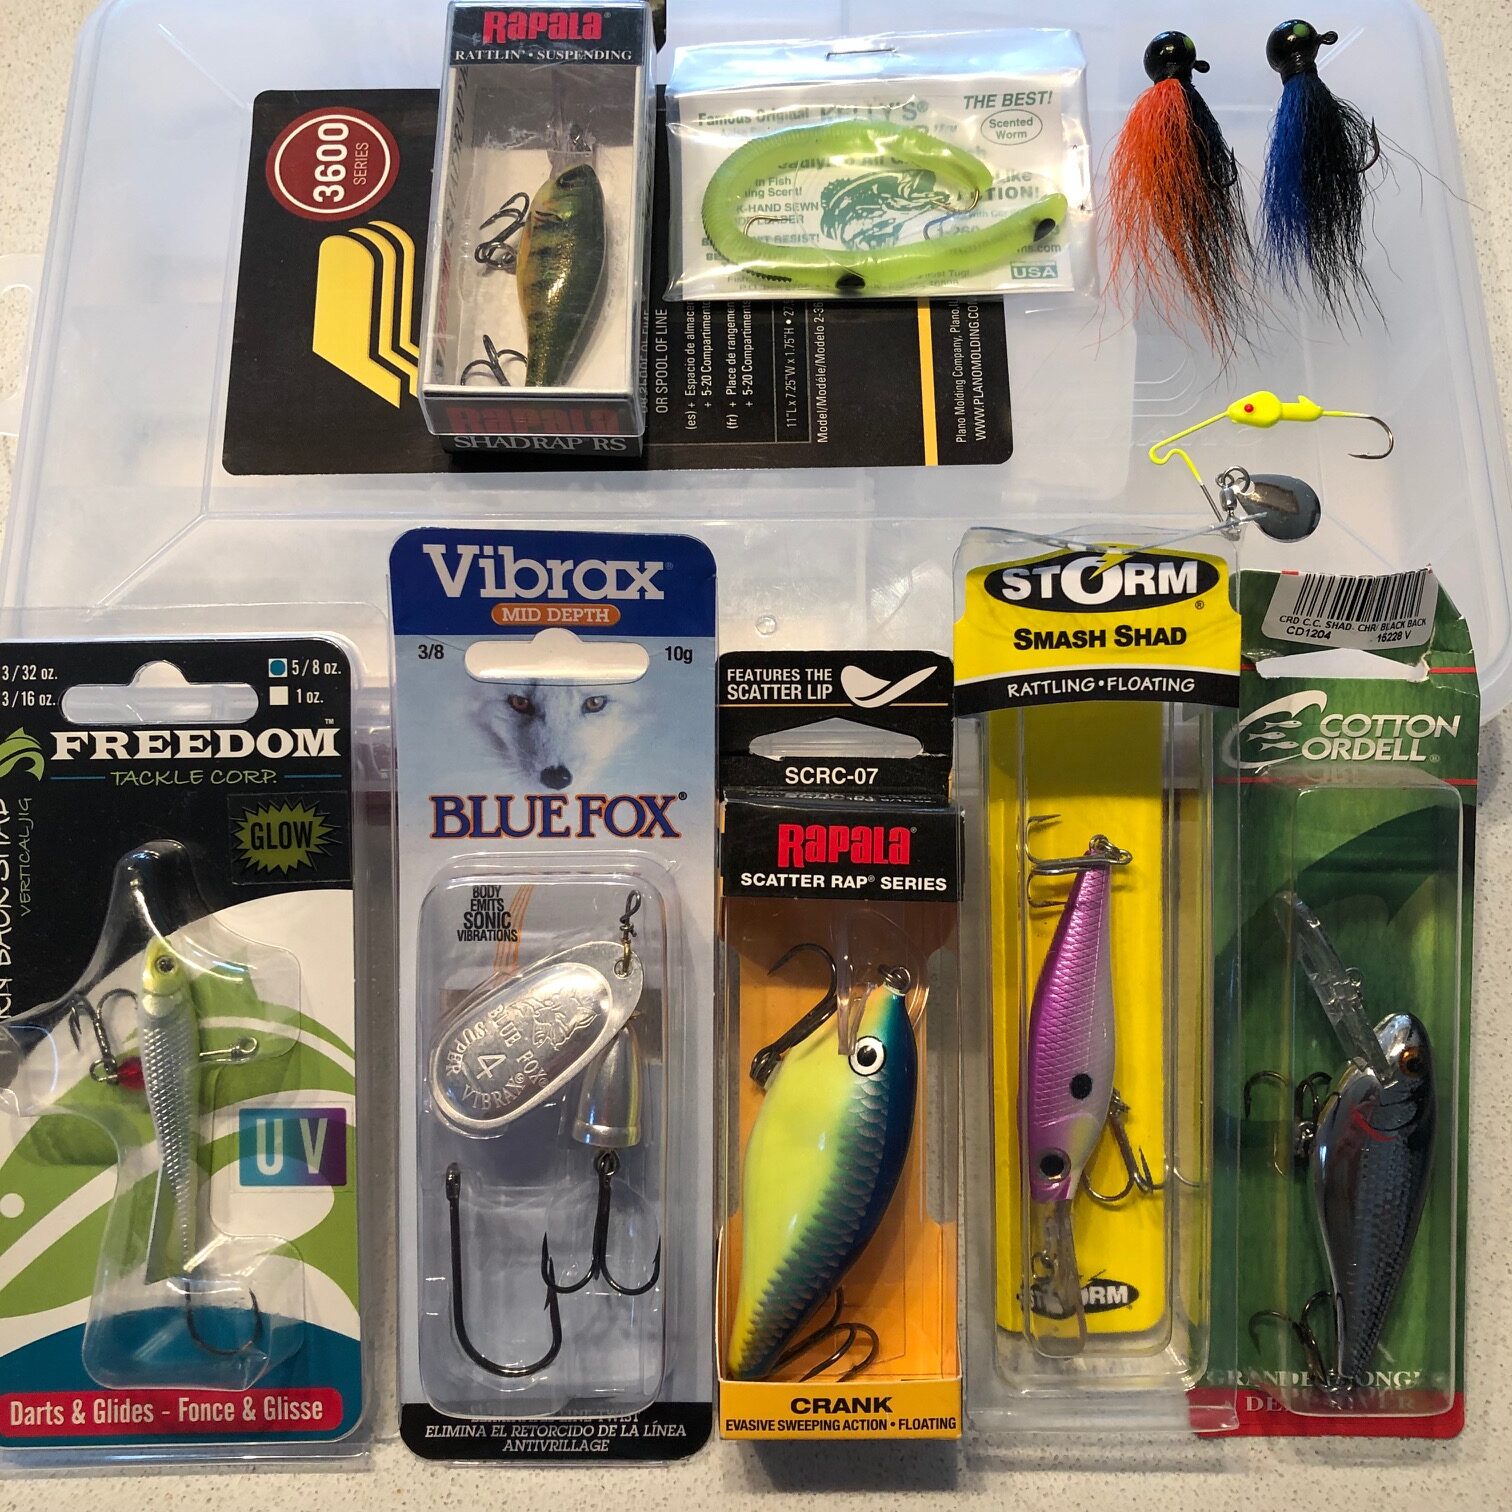 https://lachinebaitandtackle.com/wp-content/uploads/2021/11/Pourvoirie_Lachine_Bait_and_Tackle_Ron_Rather_be_Fishing_Lure_and_Tackle_Box-rotated.jpg